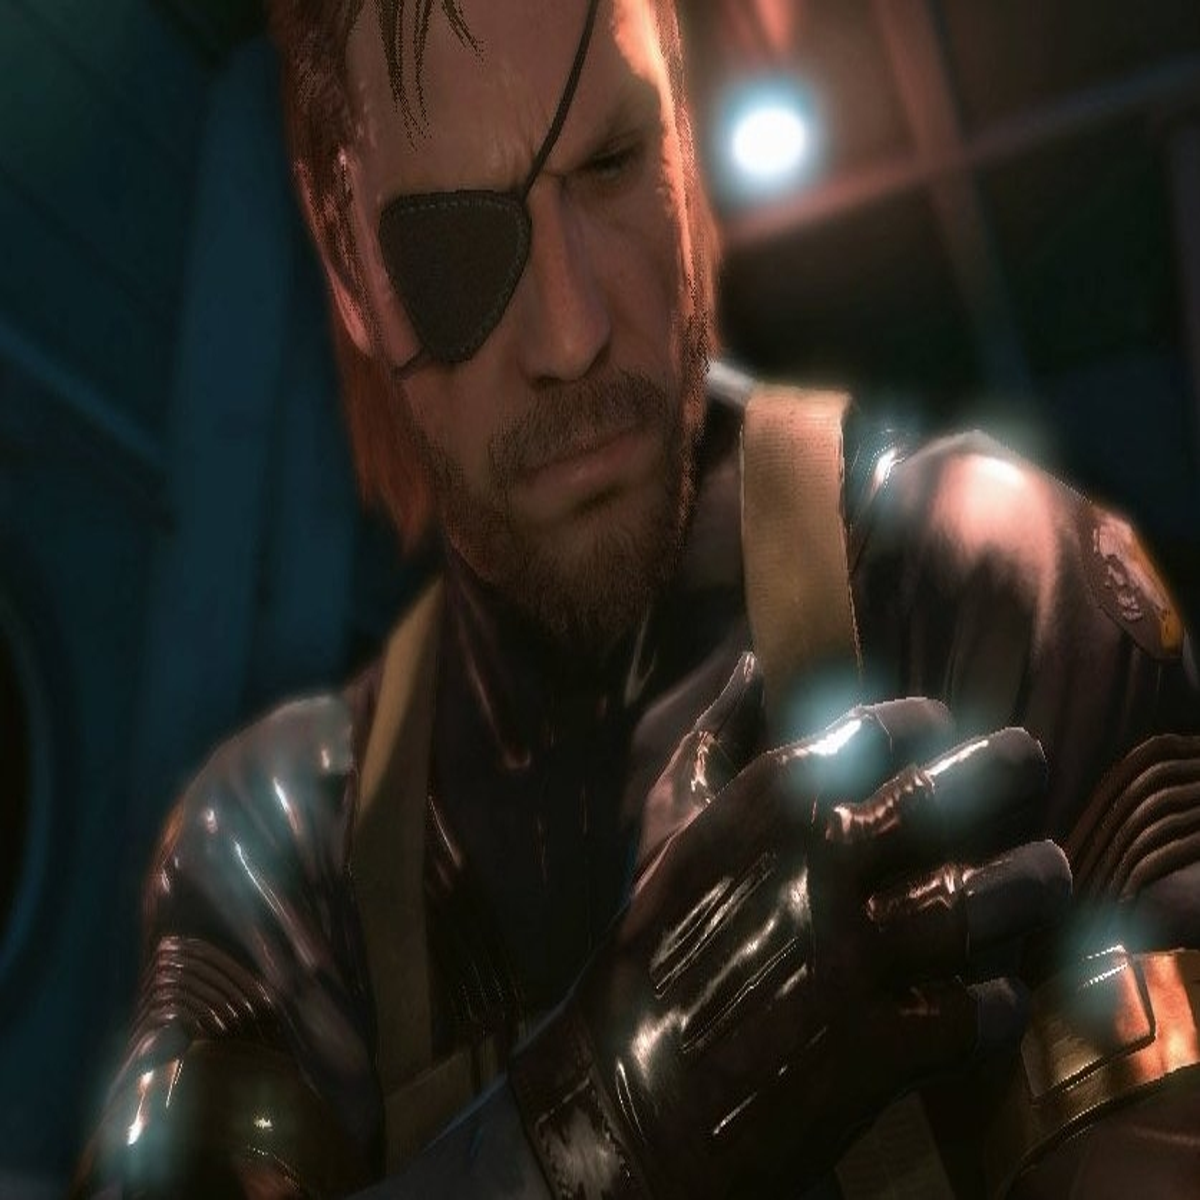 Metal Gear Solid 5: The Phantom Pain Episode 7 - Red Brass